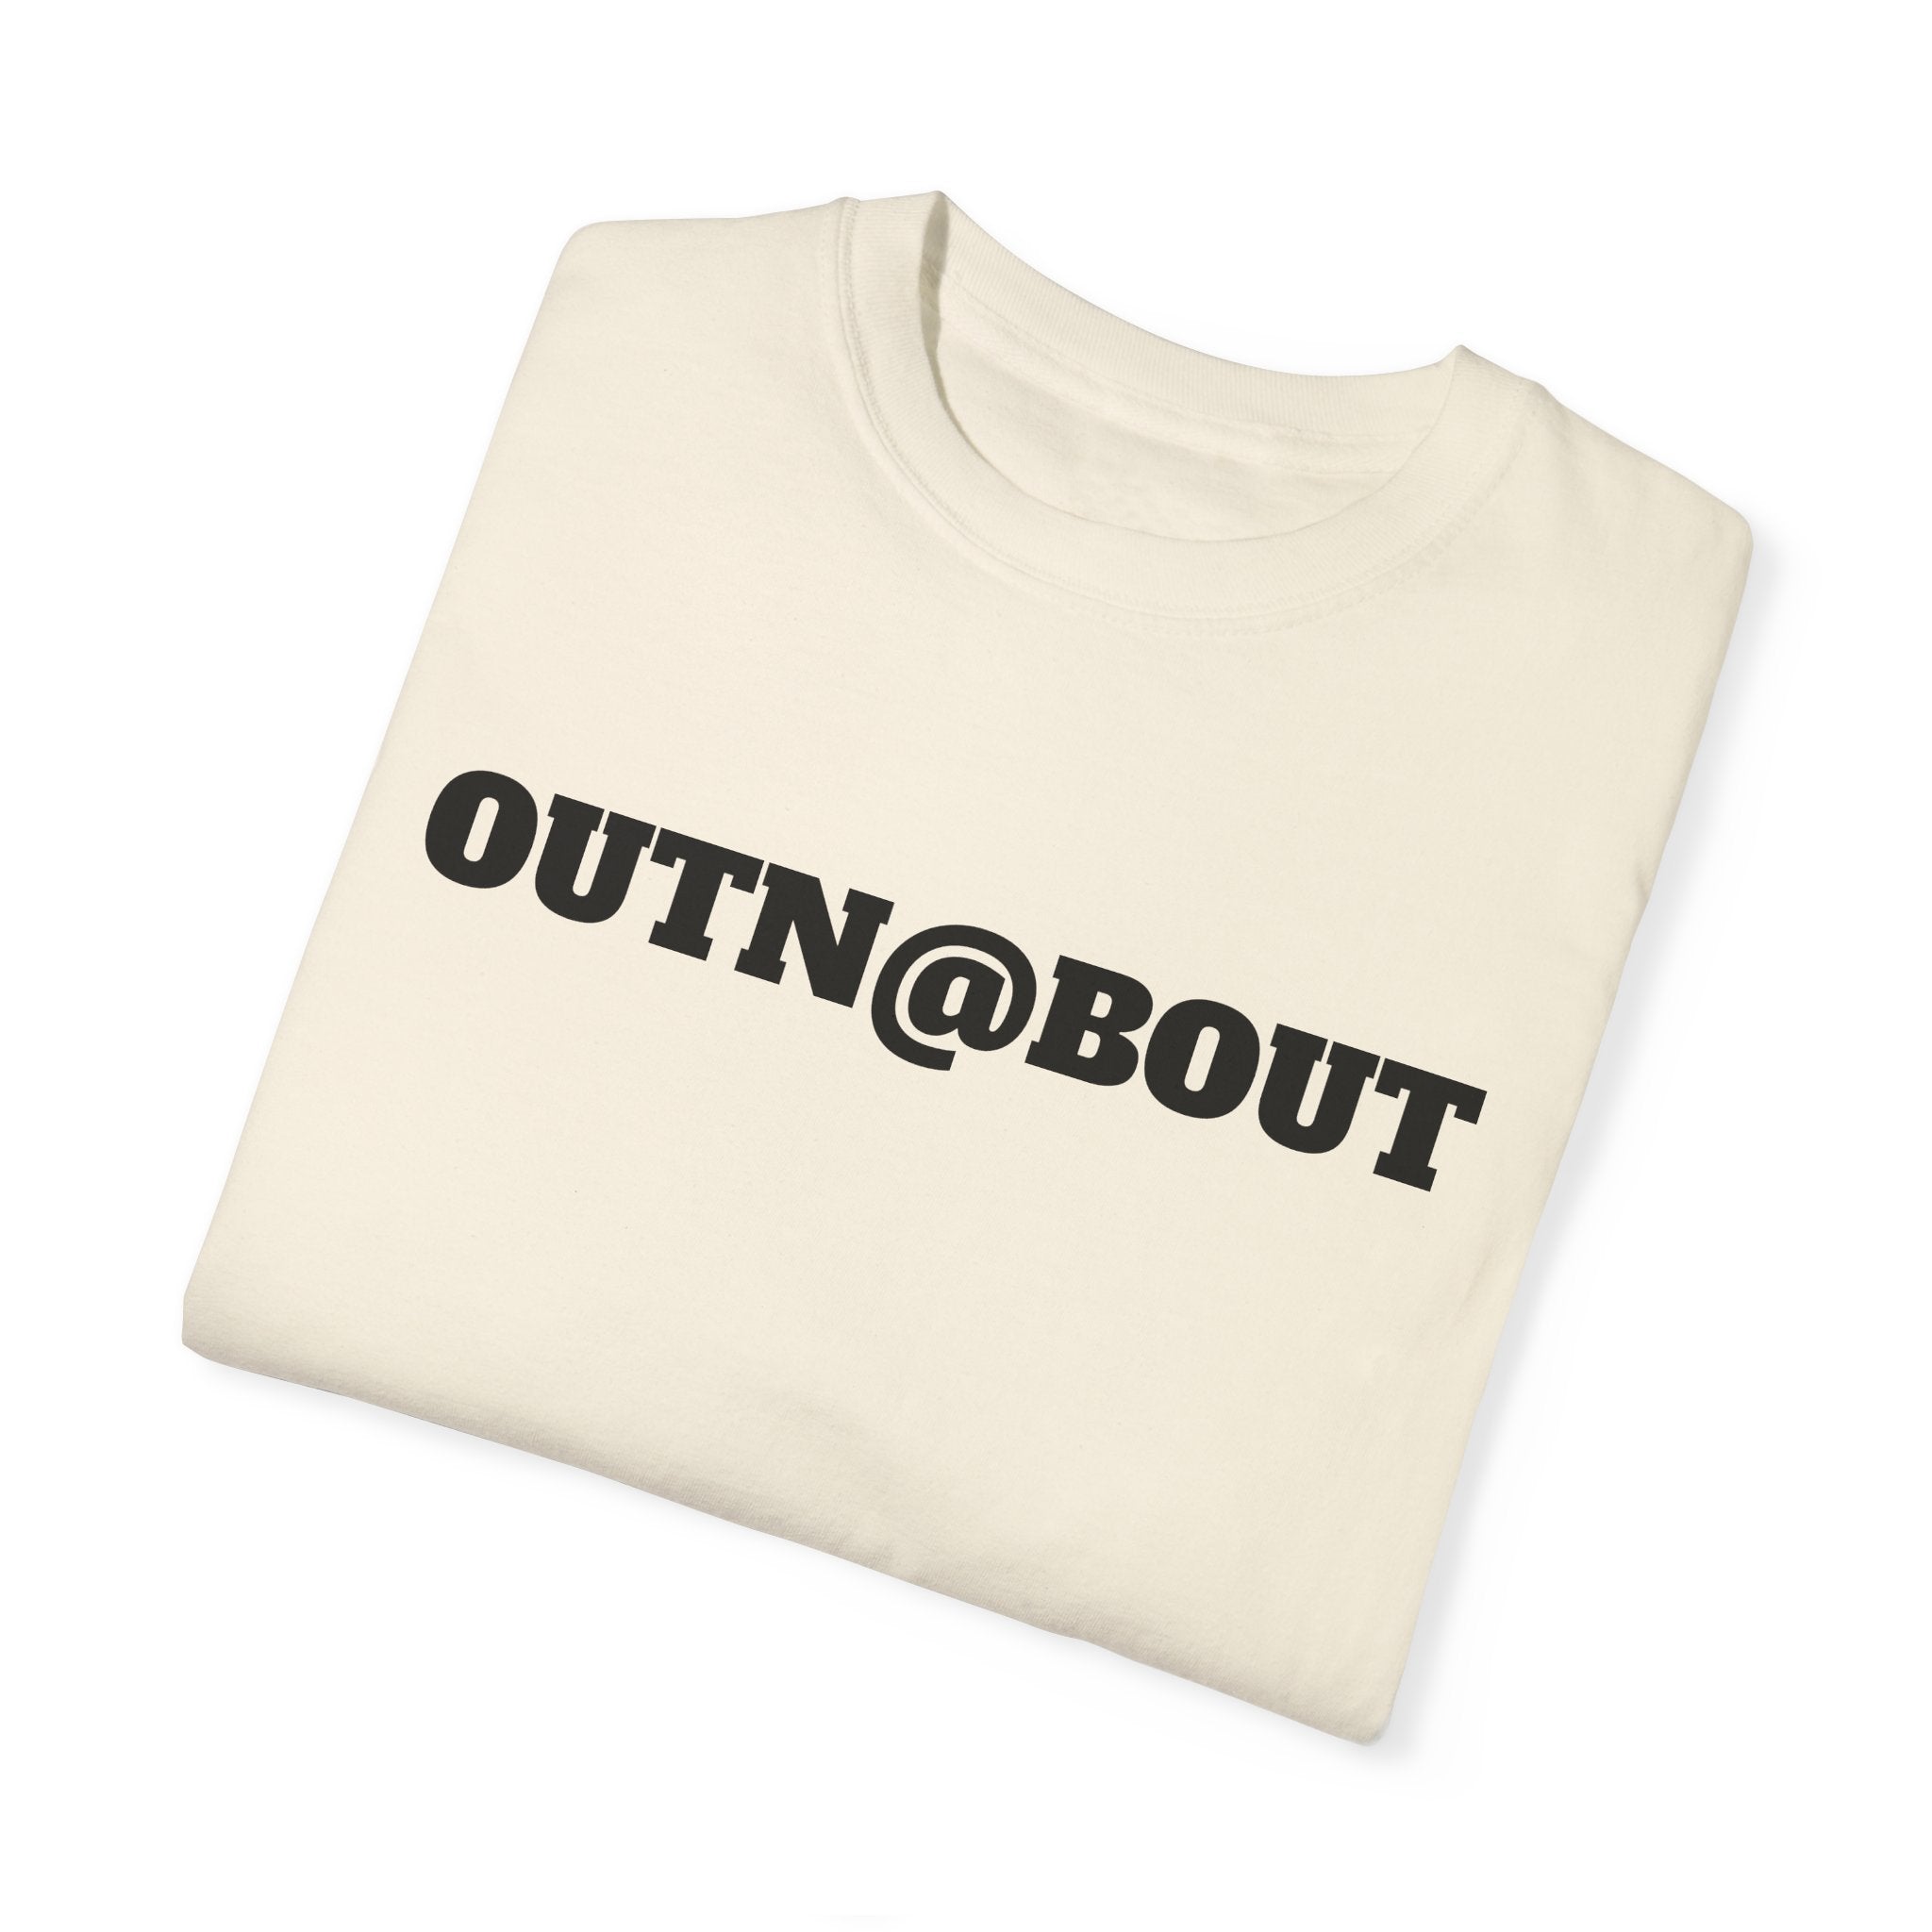 OUTN@BOUT Unisex Garment-Dyed T-shirt